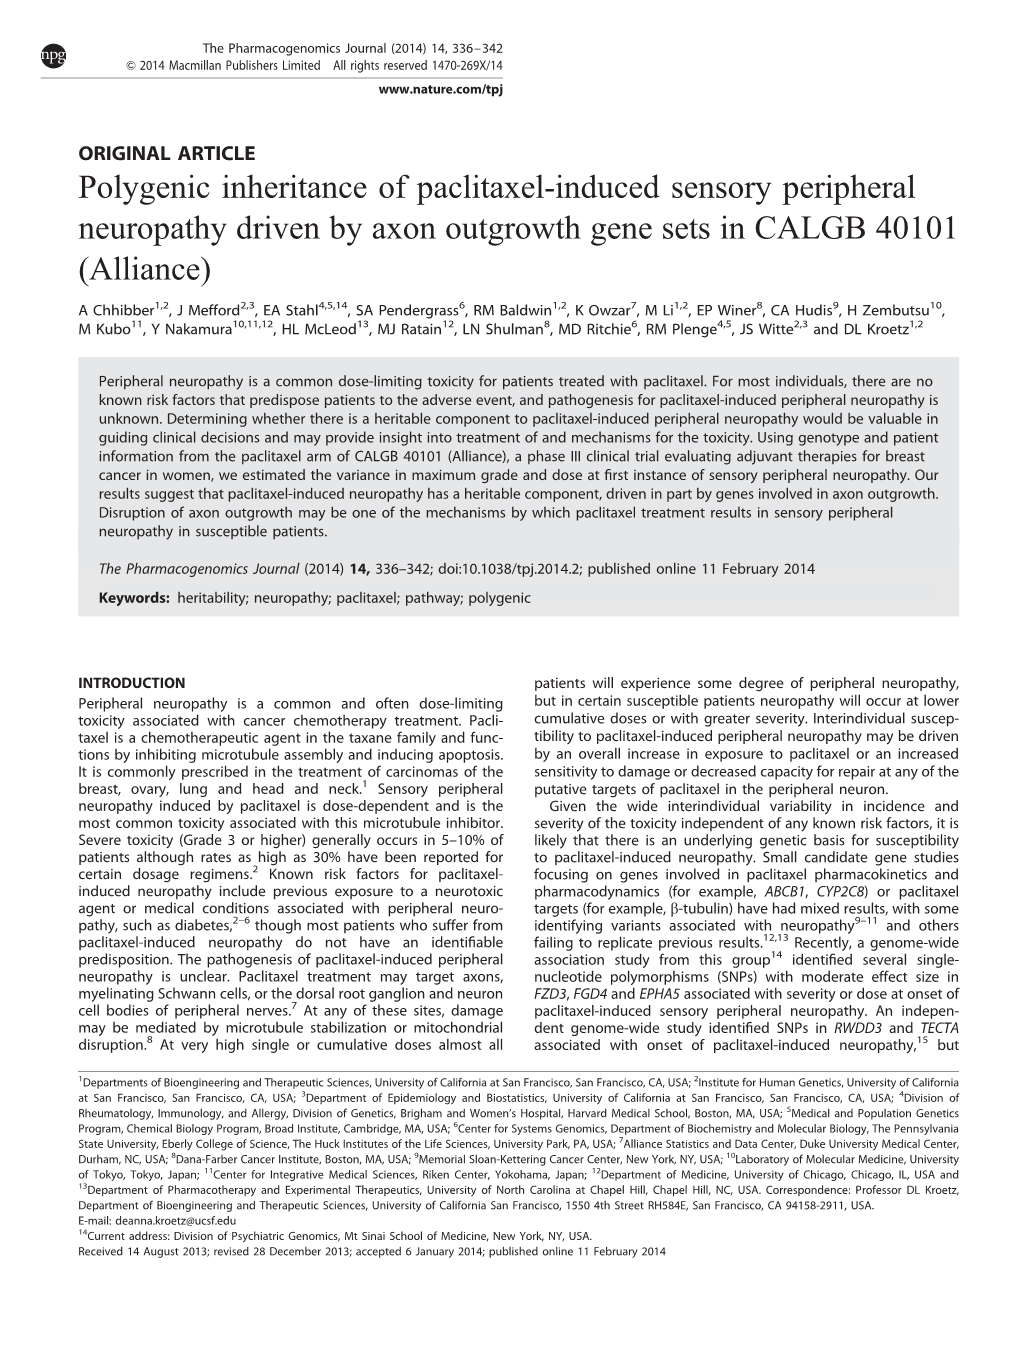 Polygenic Inheritance of Paclitaxel-Induced Sensory Peripheral Neuropathy Driven by Axon Outgrowth Gene Sets in CALGB 40101 (Alliance)